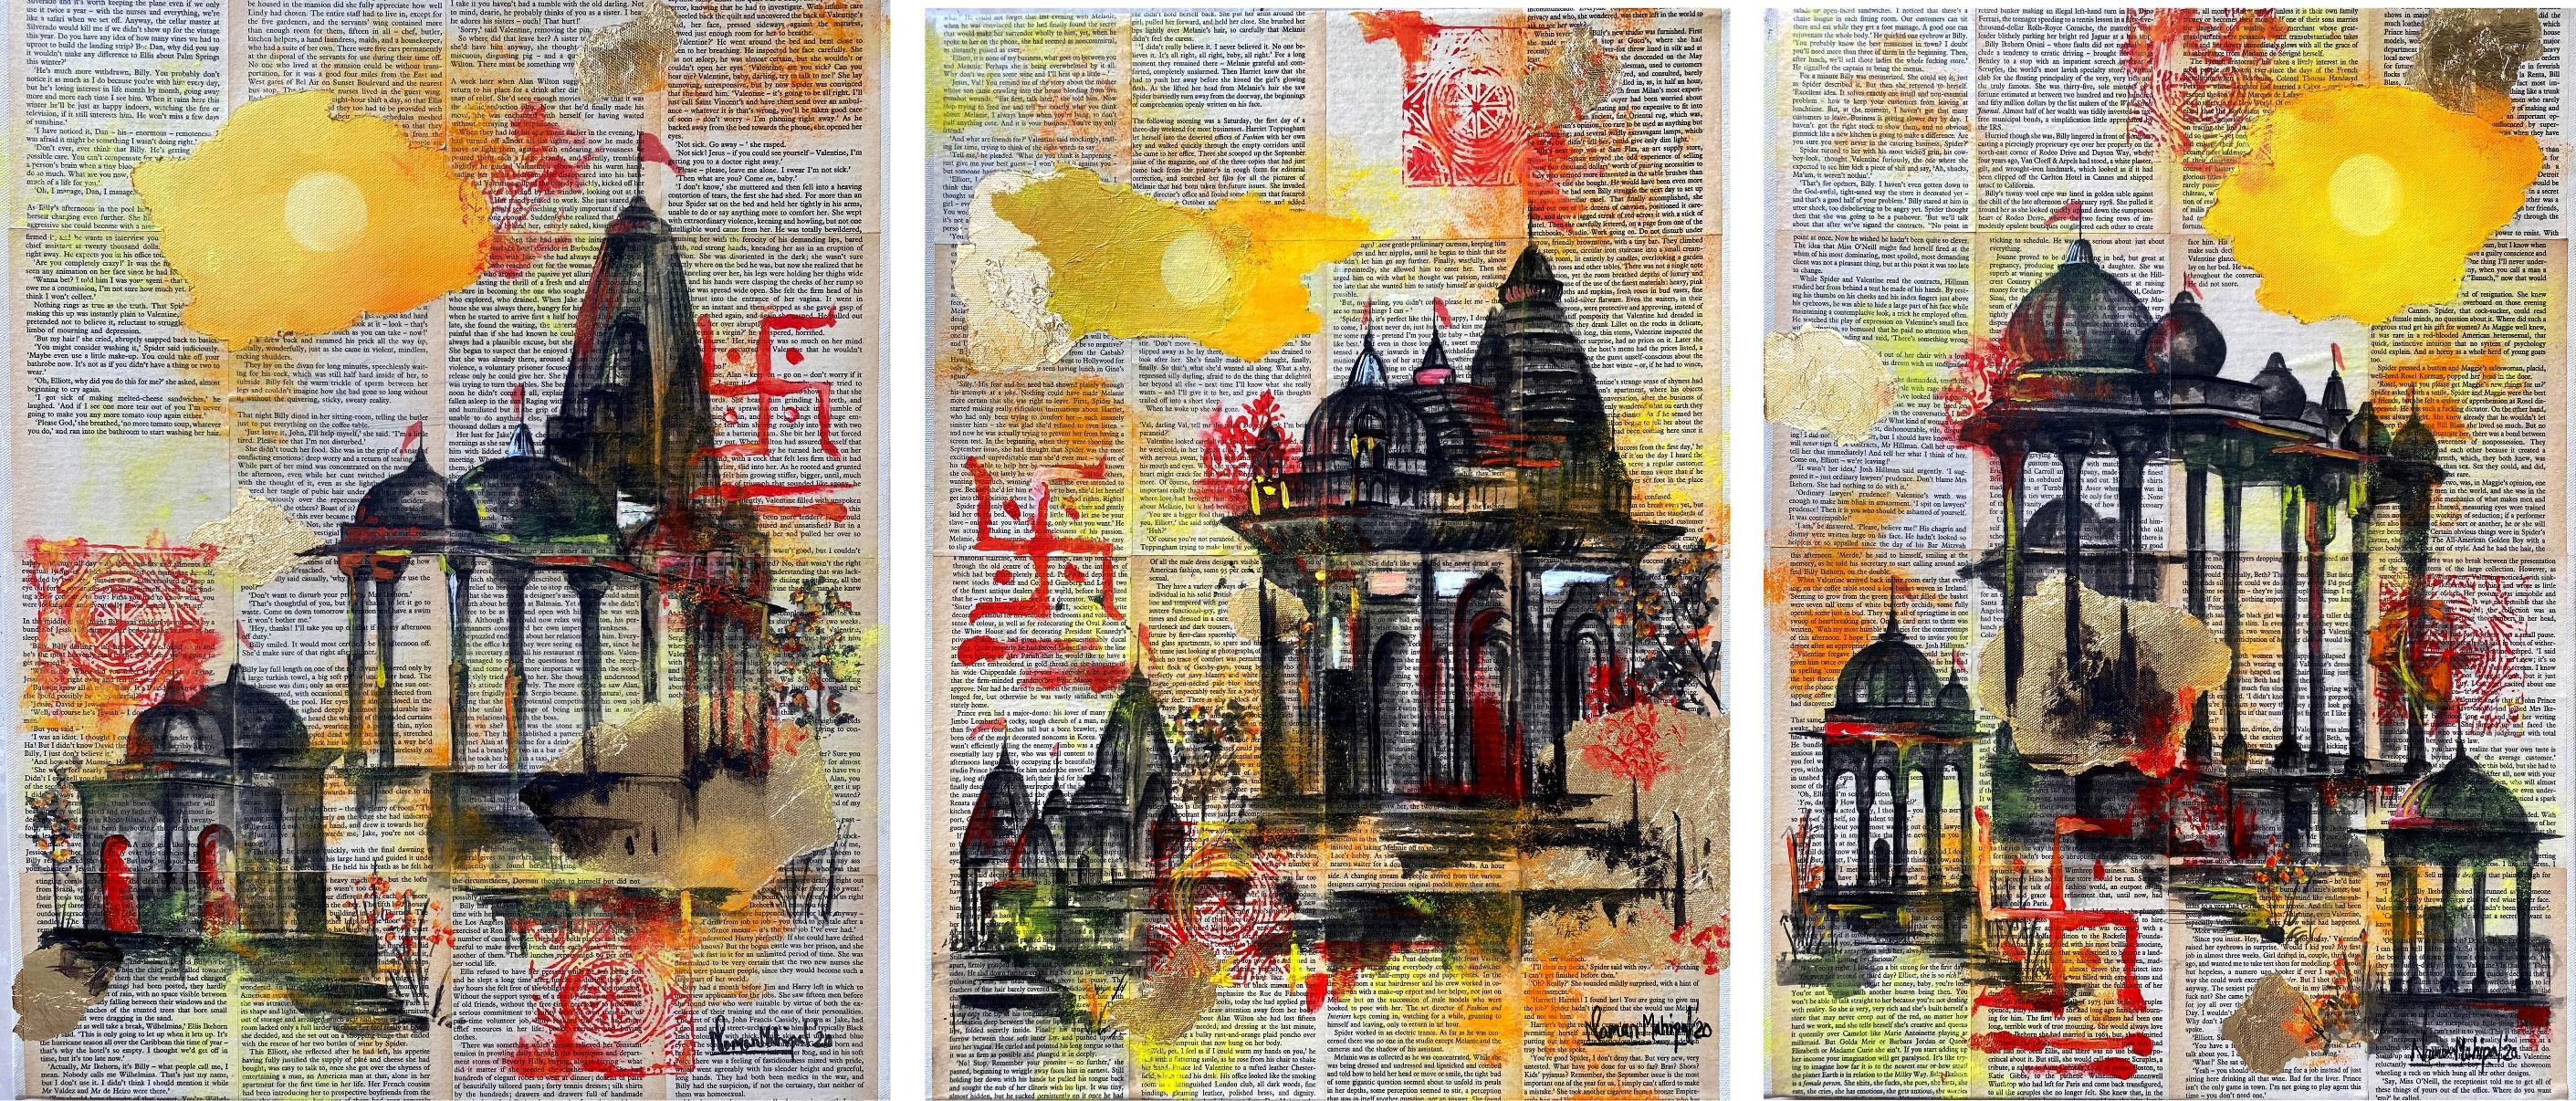 Untitled Mixed Media Ink Paper & Gold Foil on Canvas by Indian Artist "In Stock" - Mixed Media Art by Naman Mahipal